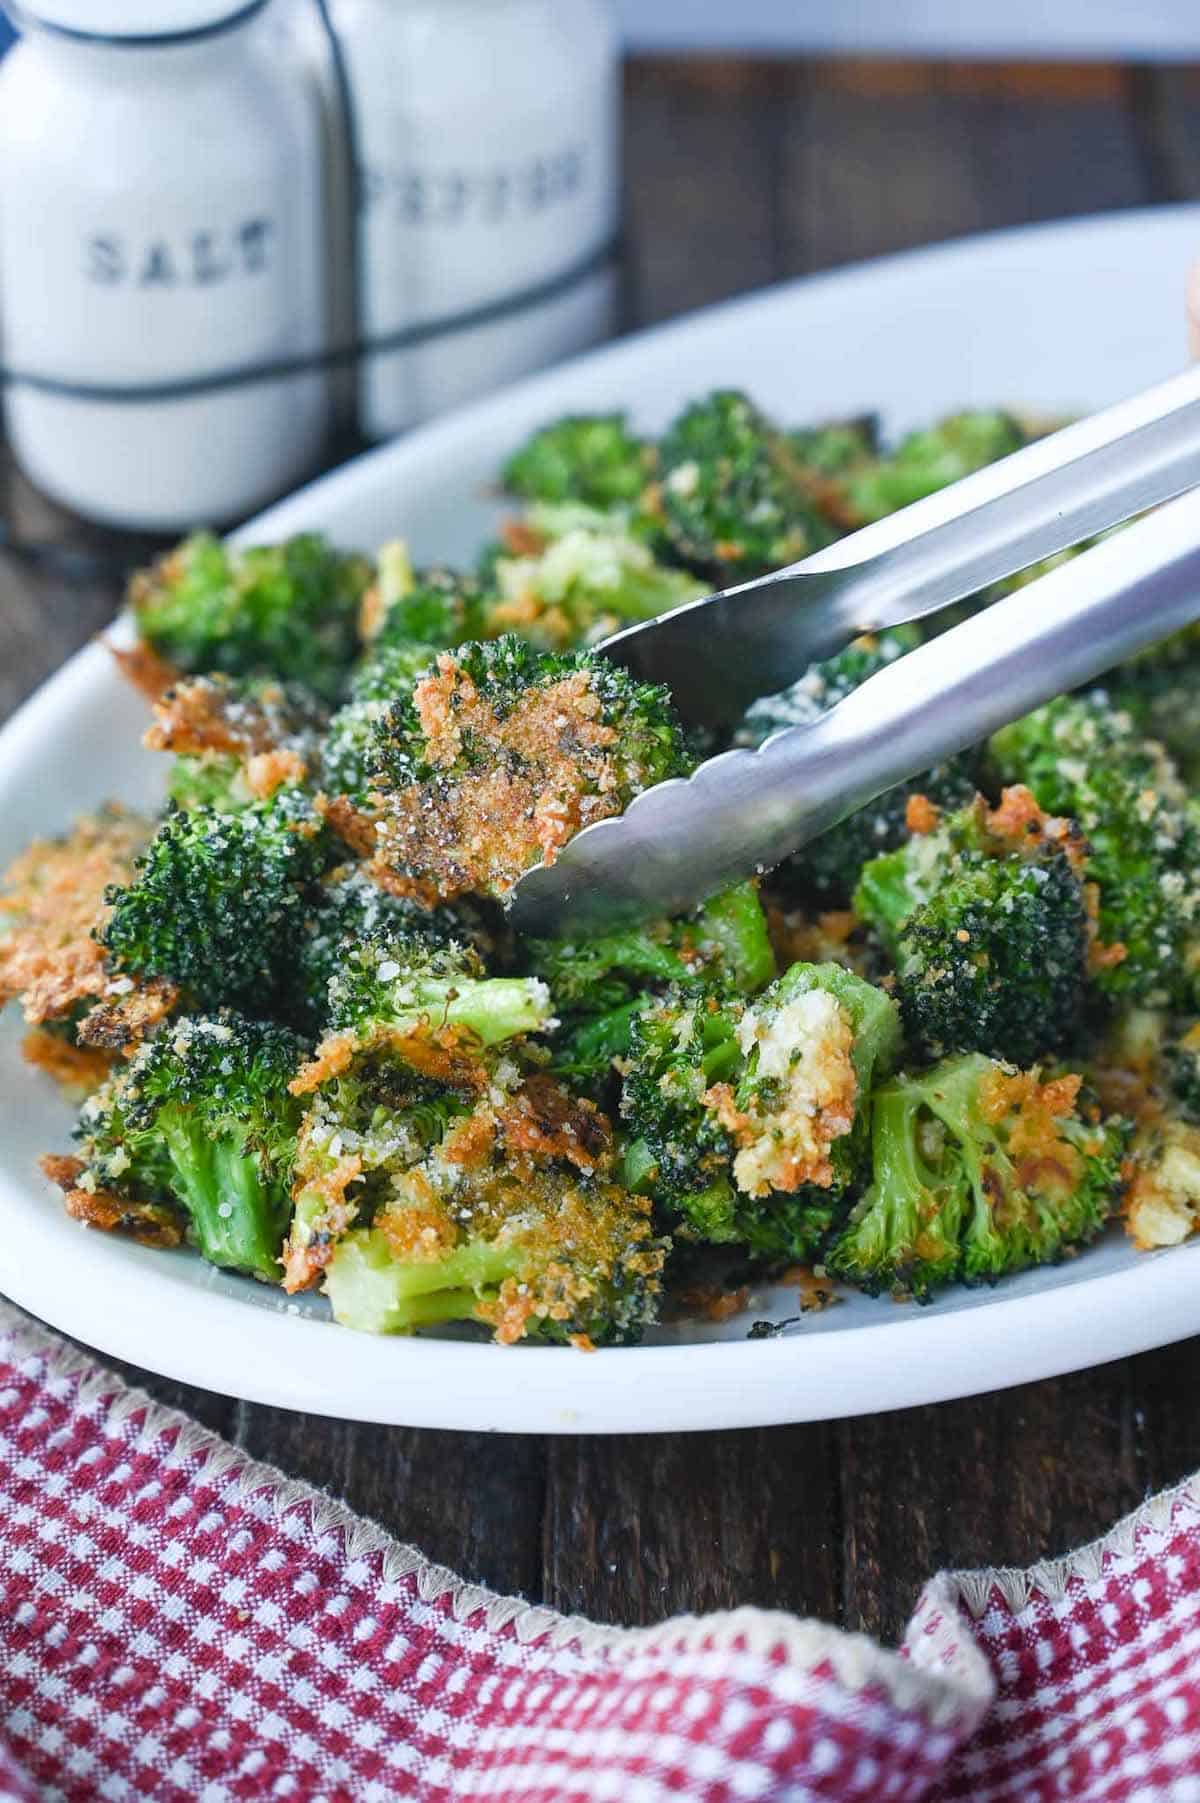 Roasted broccoli on a white platter.